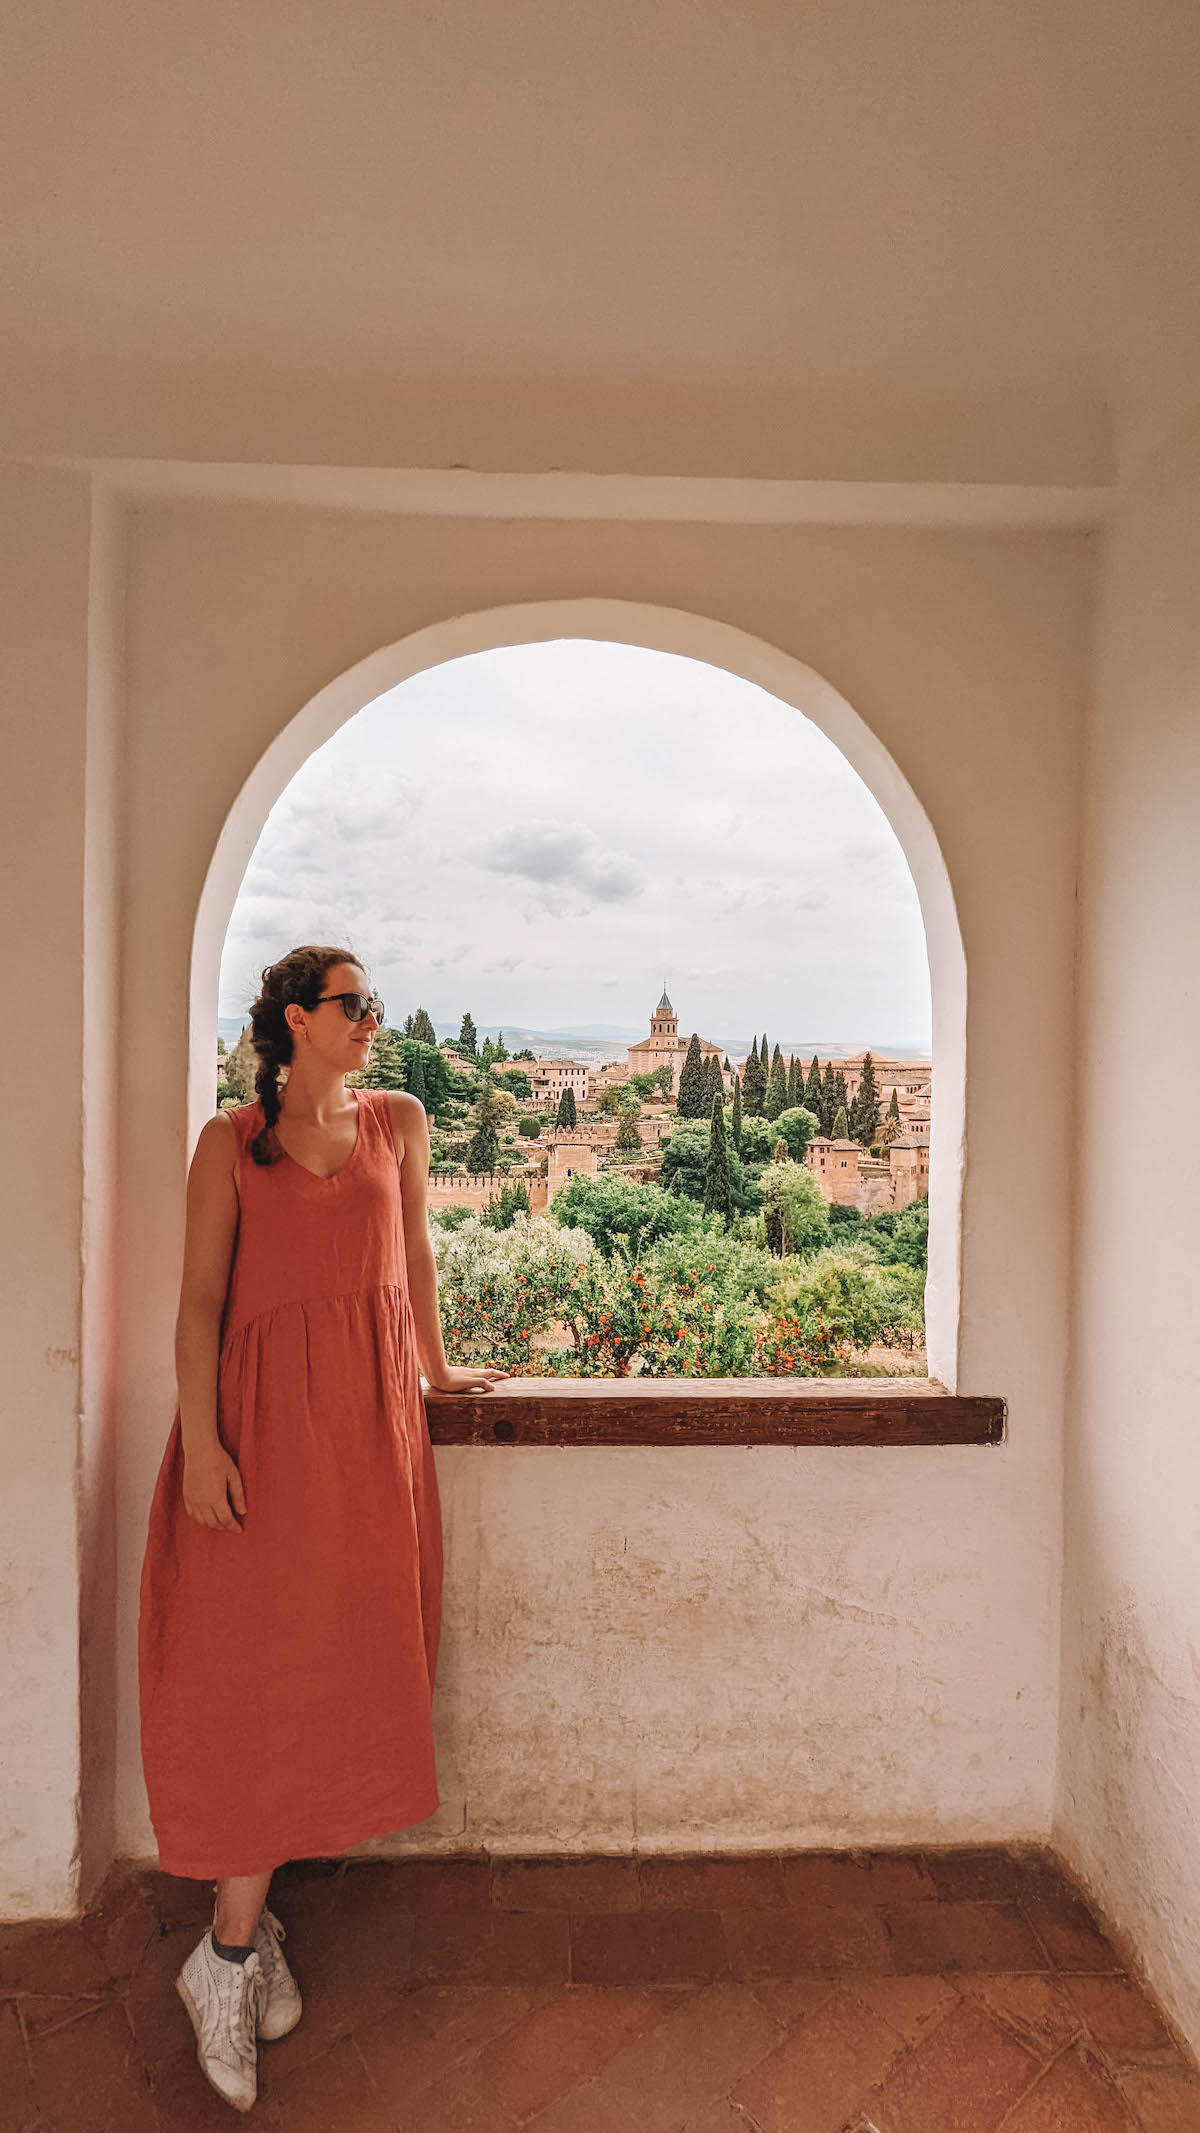 Woman gazing out a window in Generalife in the Alhambra